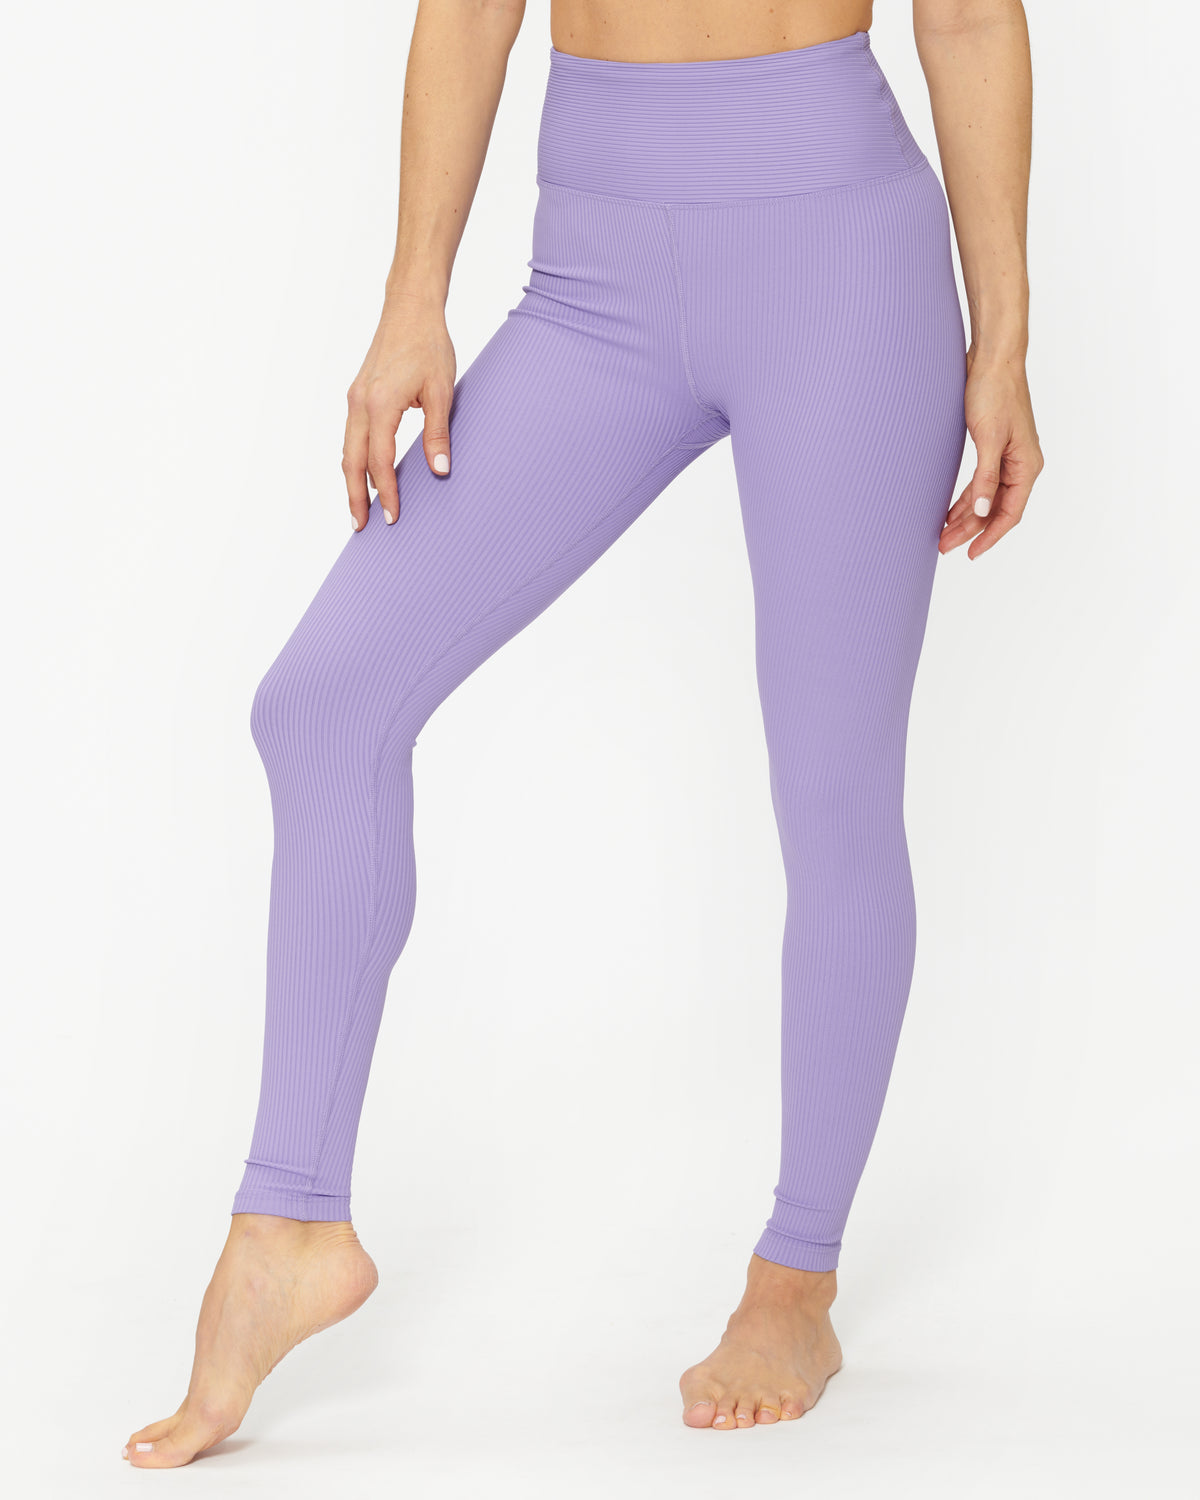 YEAR OF OURS Football Legging Lilac LEGGINGS